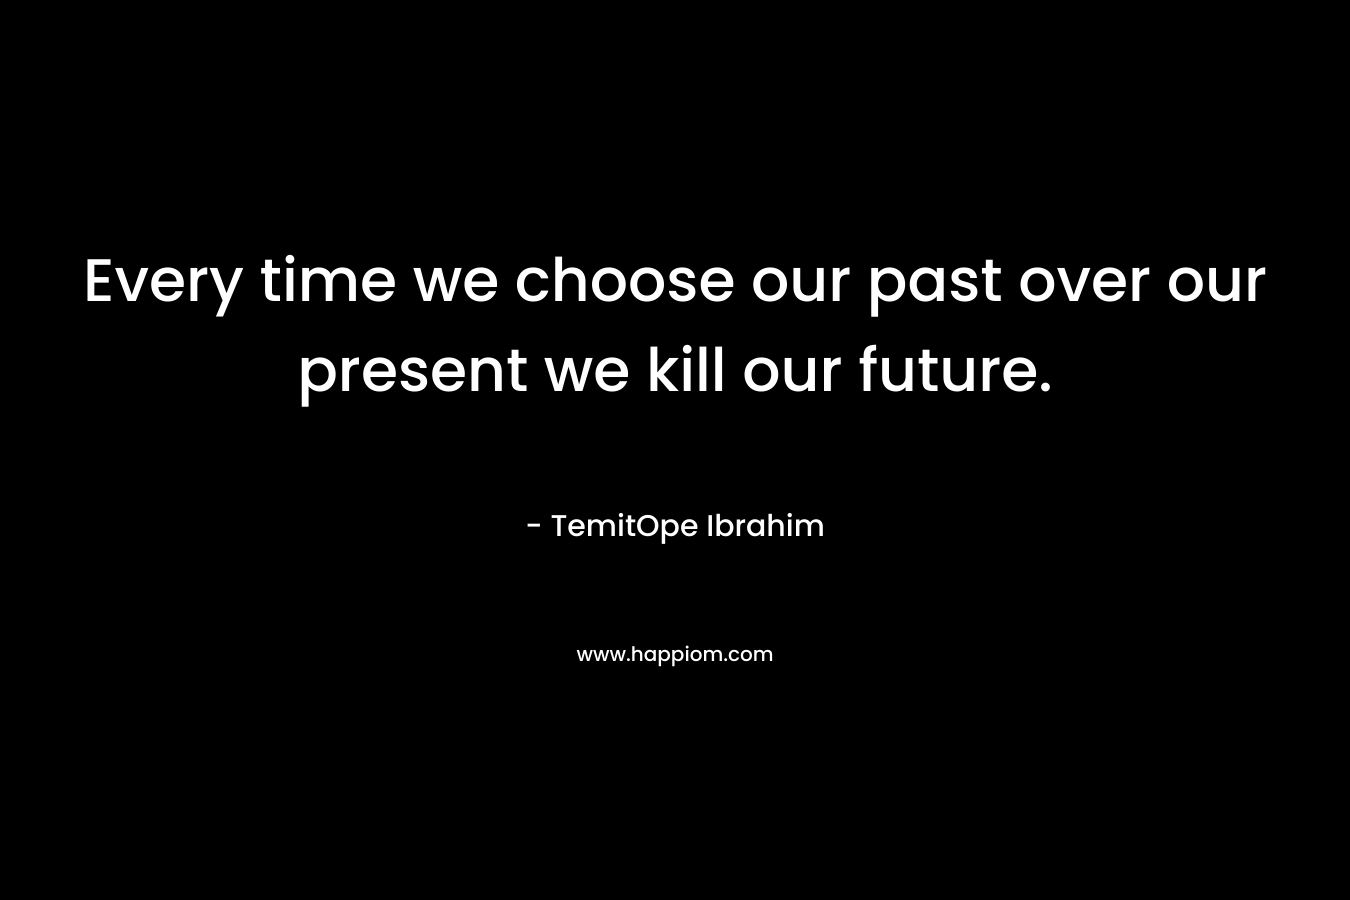 Every time we choose our past over our present we kill our future.